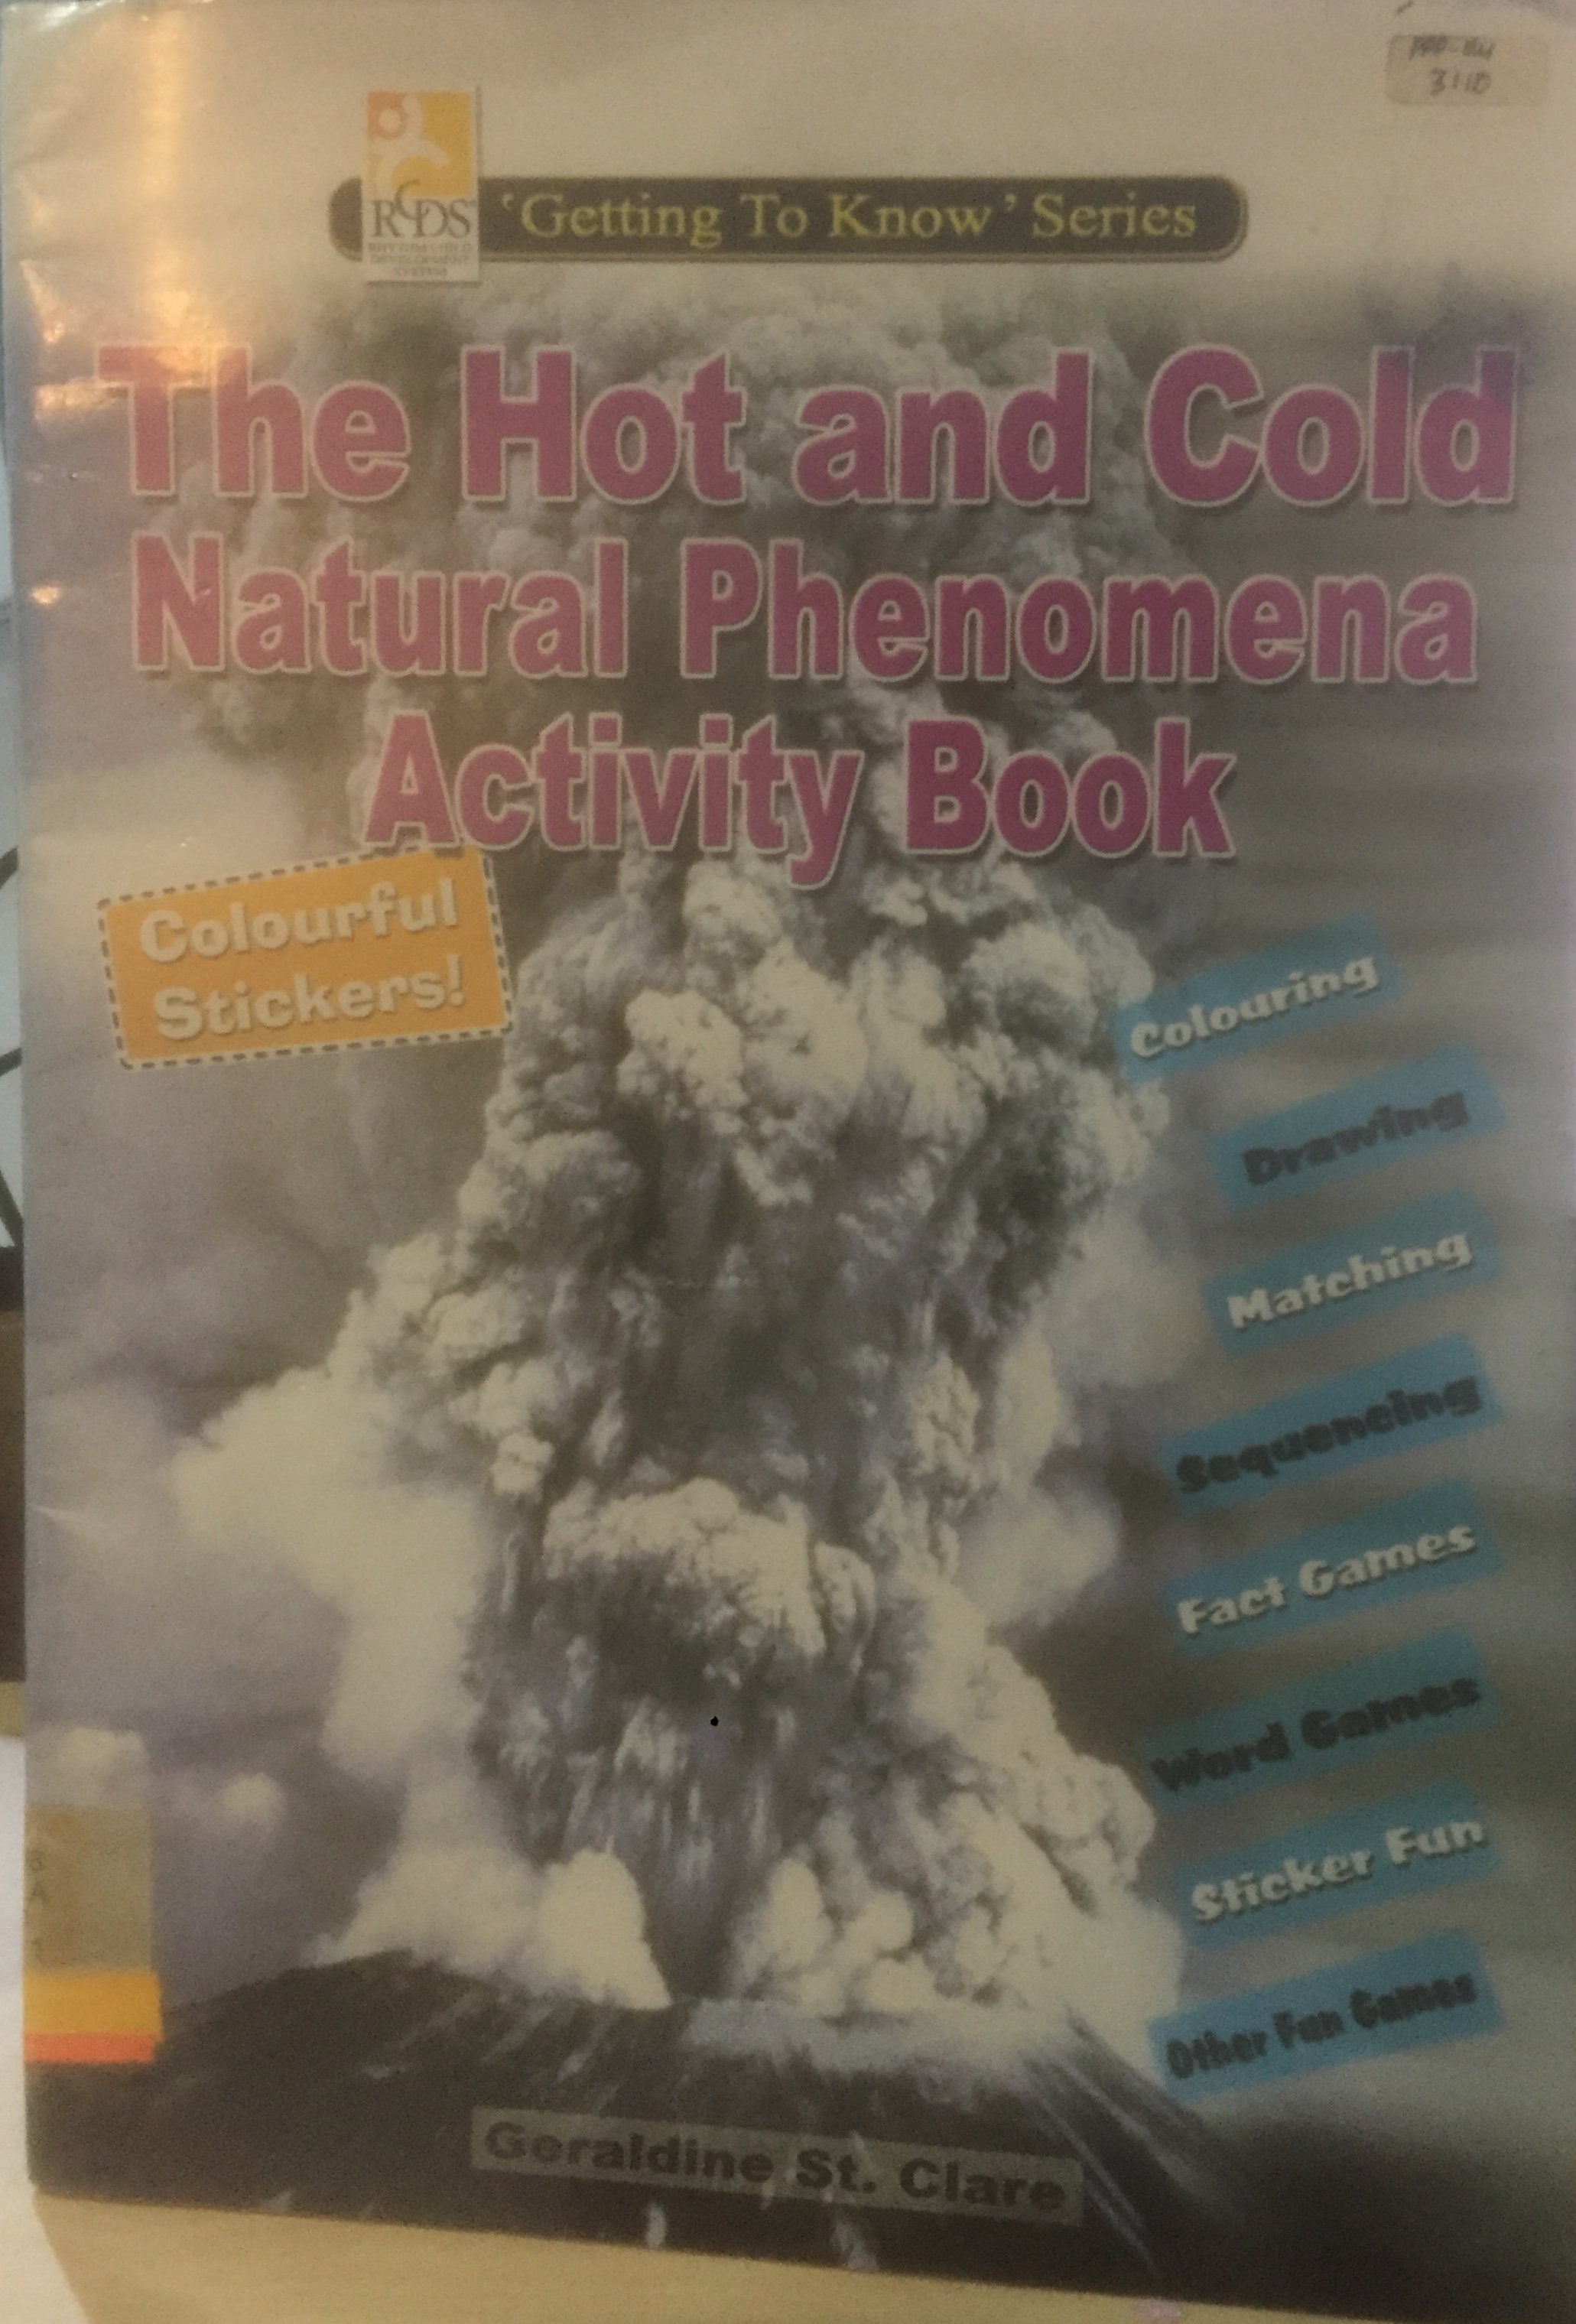 The hot and cold natural phenomena activity book